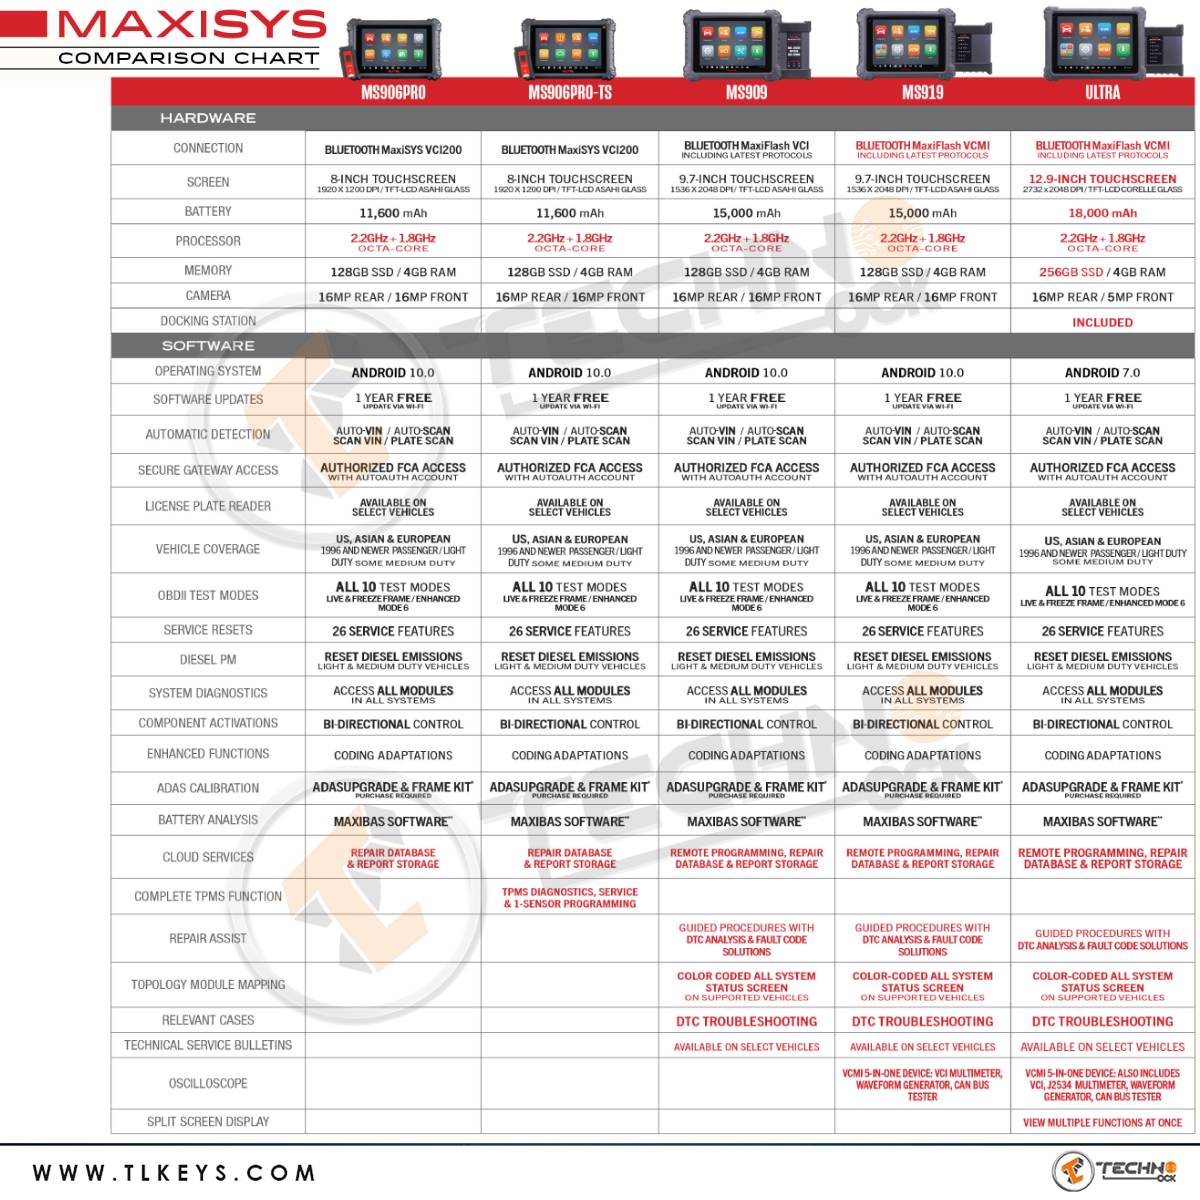  Diagnostics this infographic to easily compare the hardware & software functions of the Autel MaxiSys series